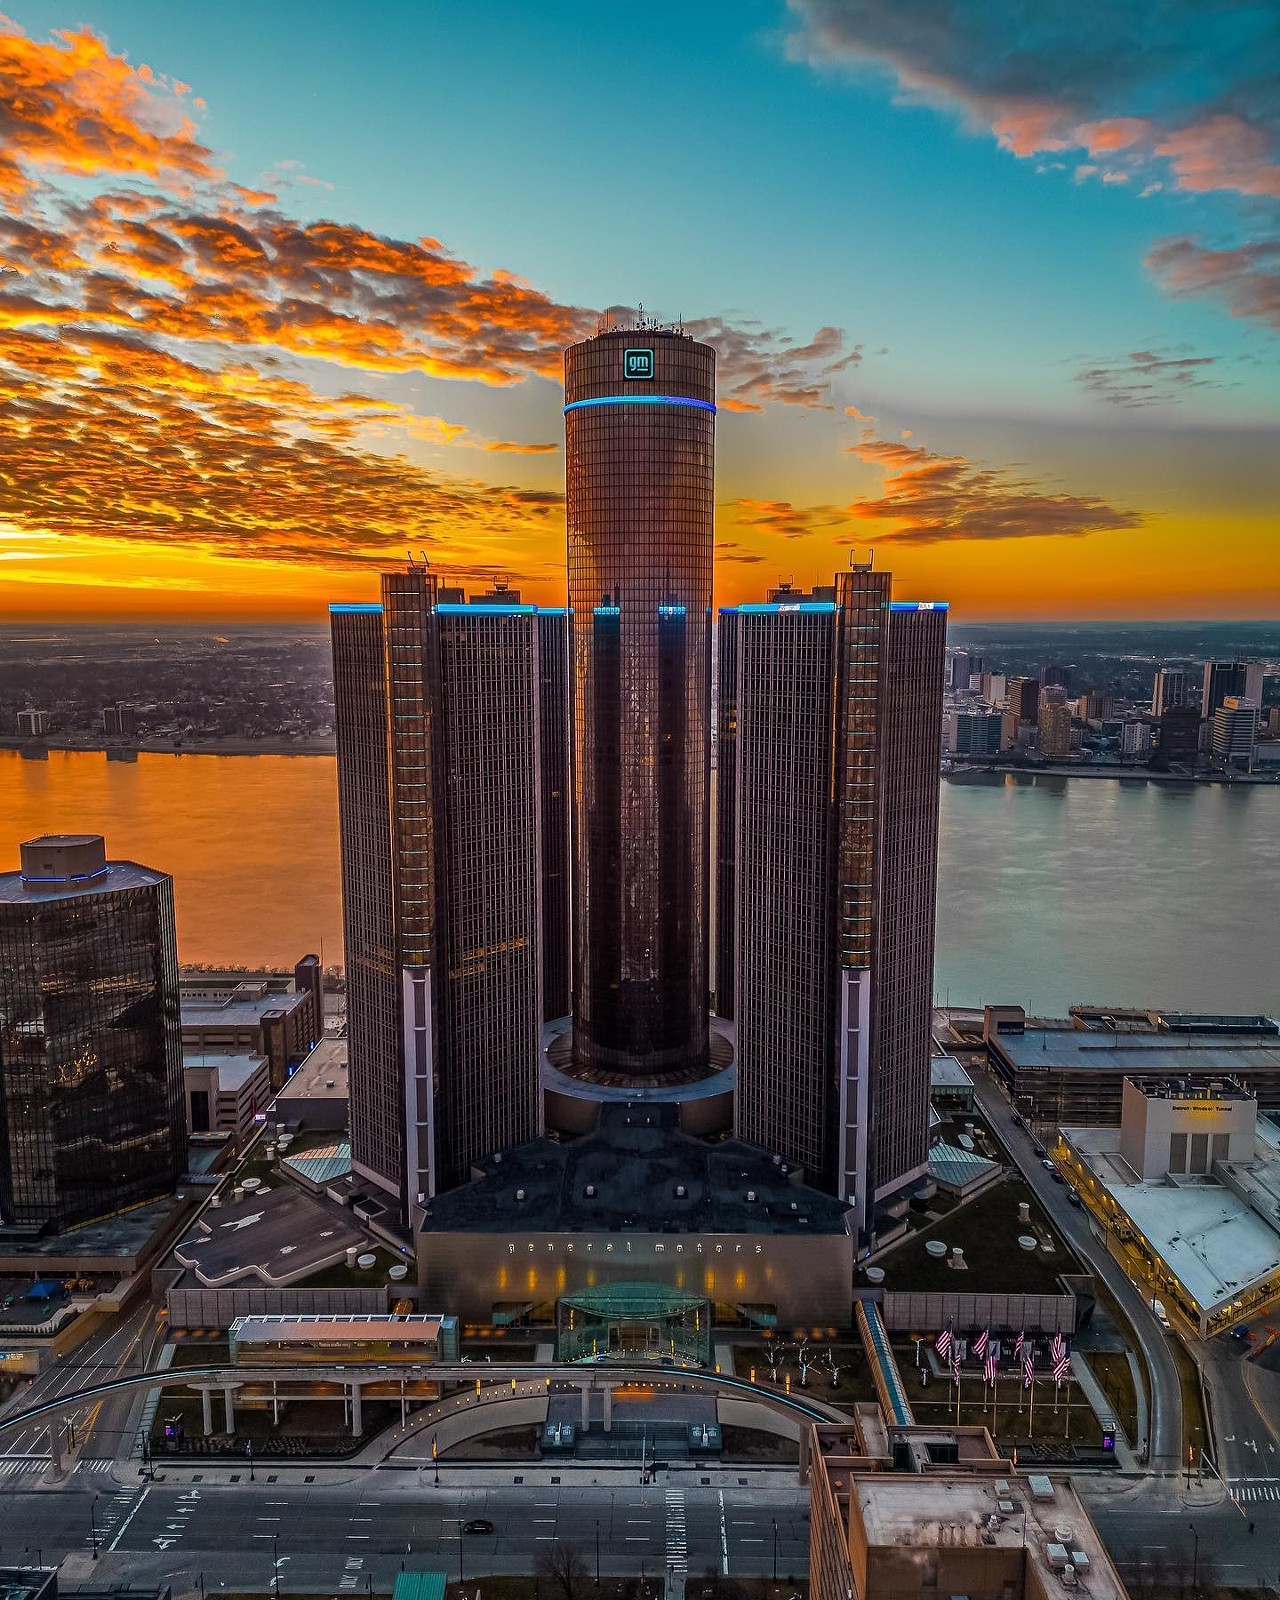 GM Renaissance Center
400 Renaissance Center, Detroit; gmrencen.com
Built in the 1970s, the Renaissance Center reshaped Detroit's skyline with what is now the tallest skyscraper in the city. Designed by John Portman, its seven interconnected towers house hotels, offices, and retail spaces.